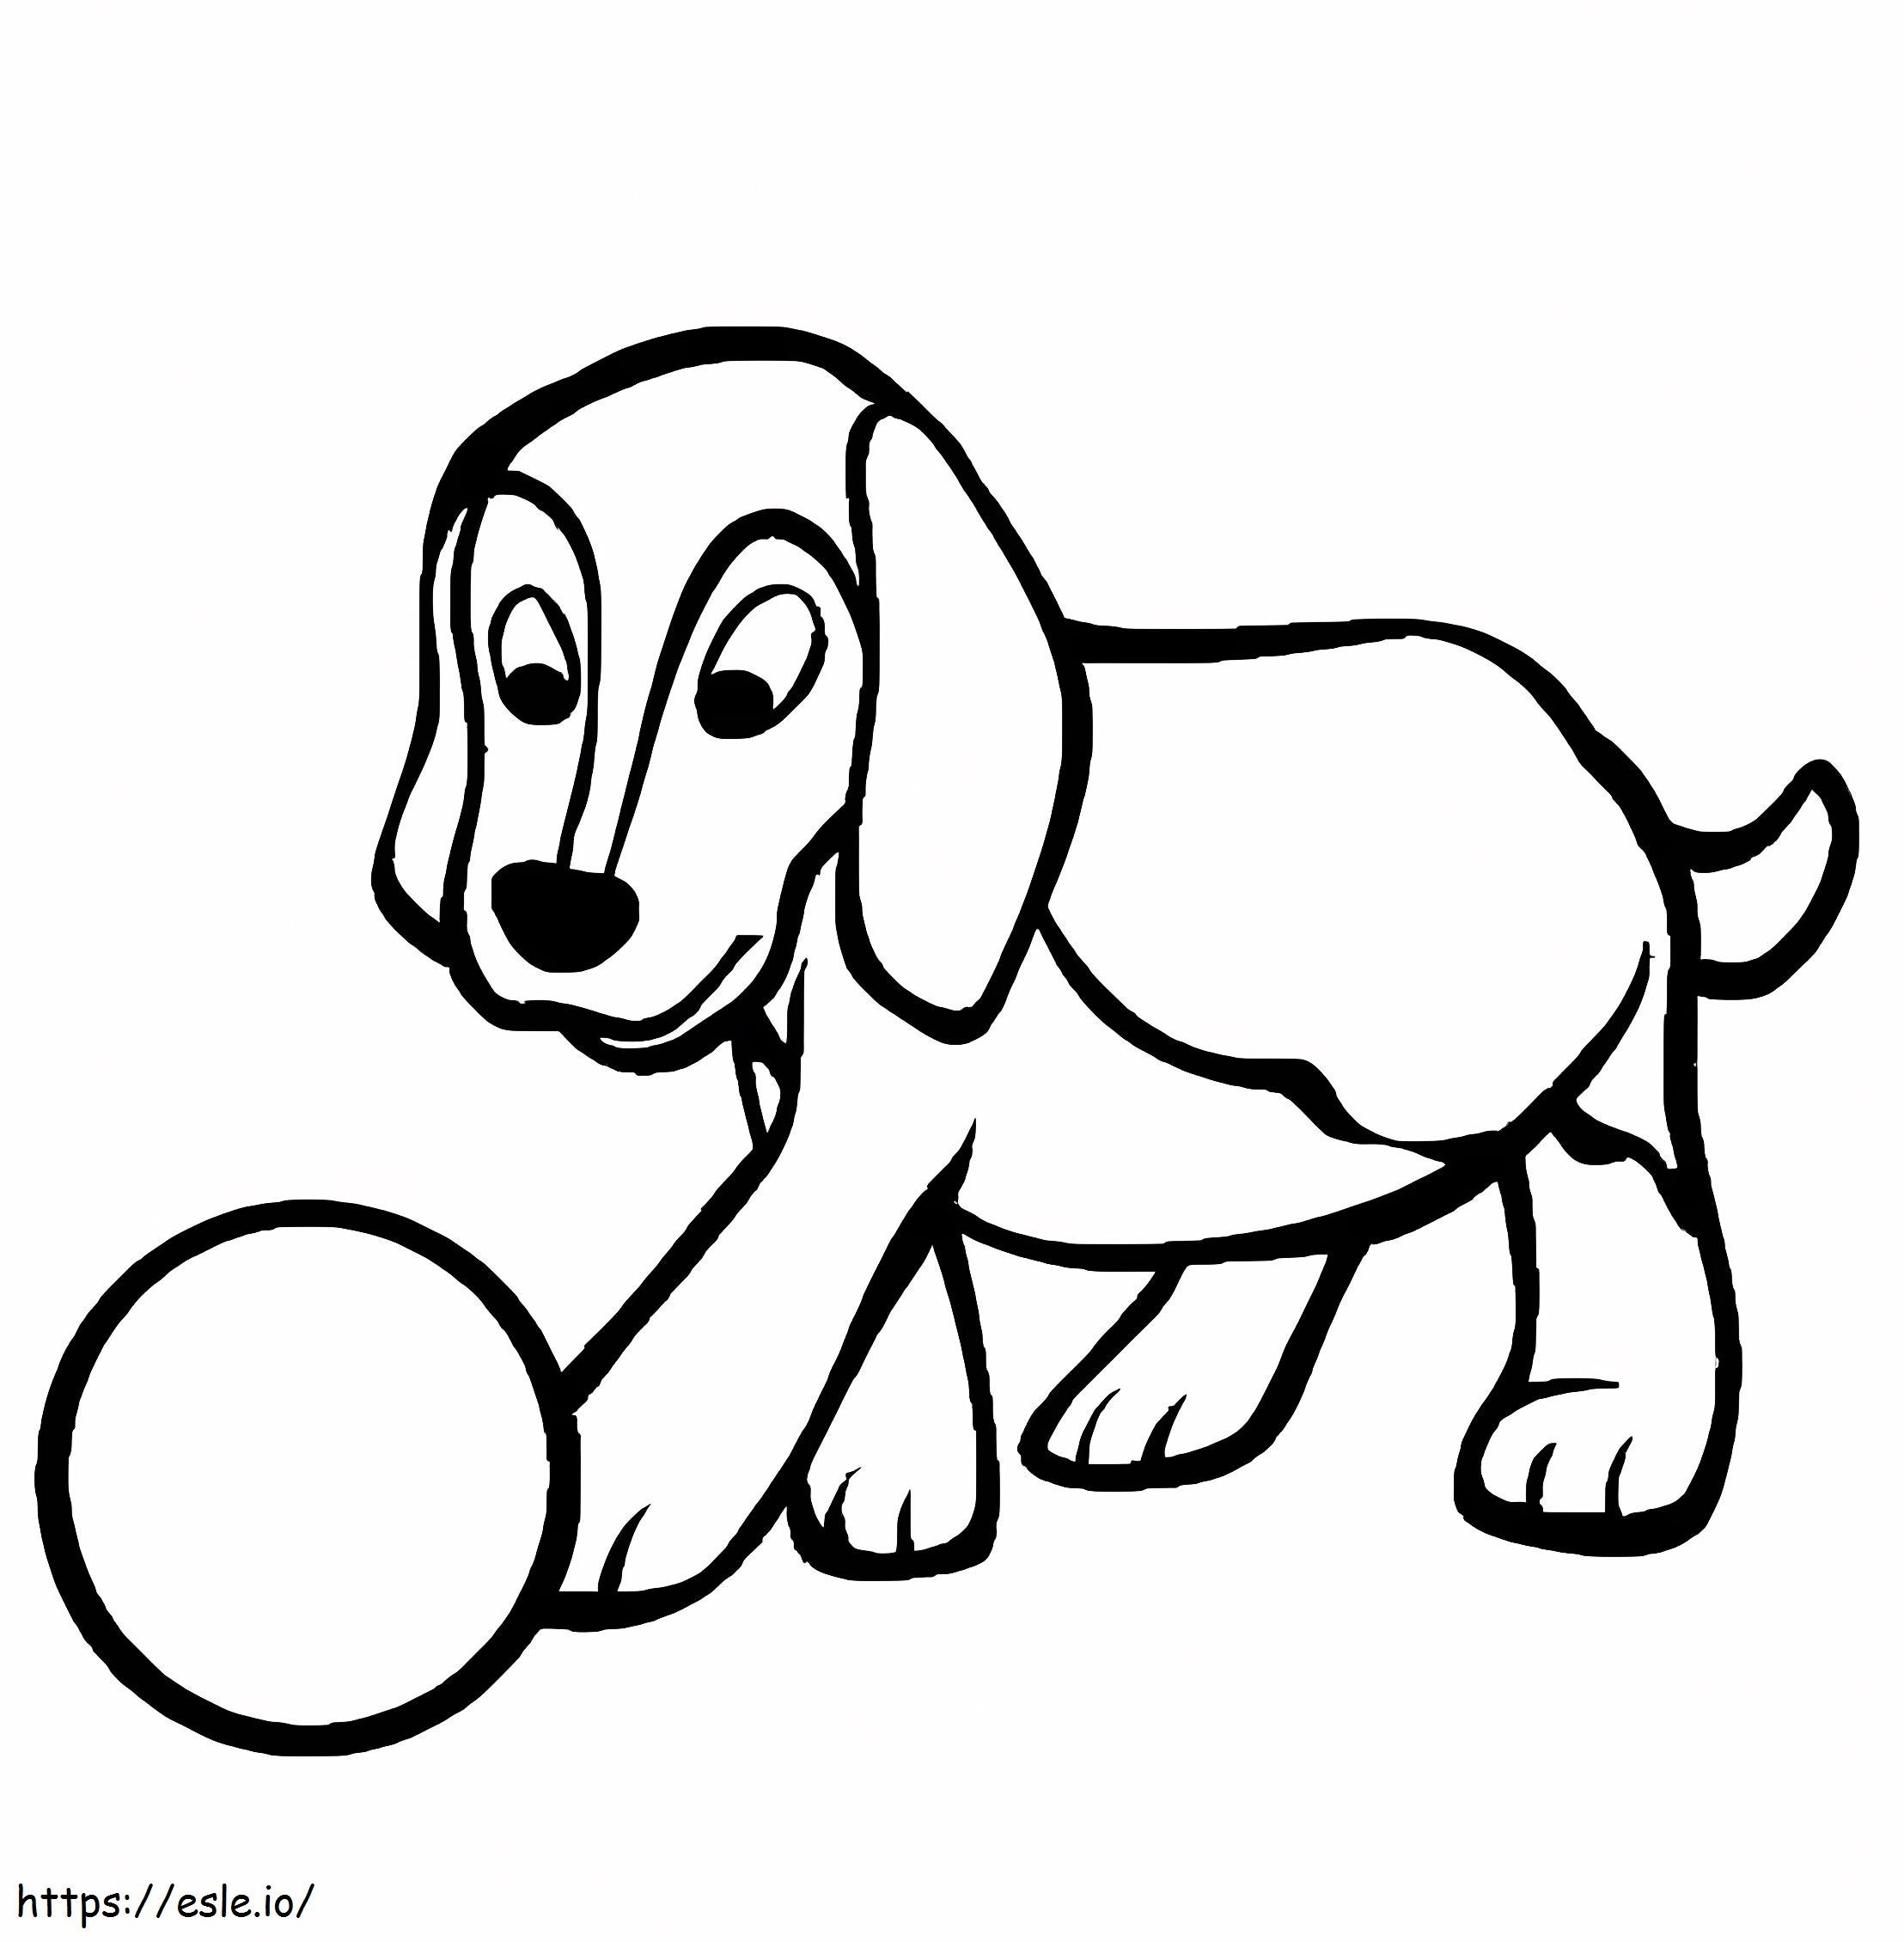 Beagle With A Ball coloring page